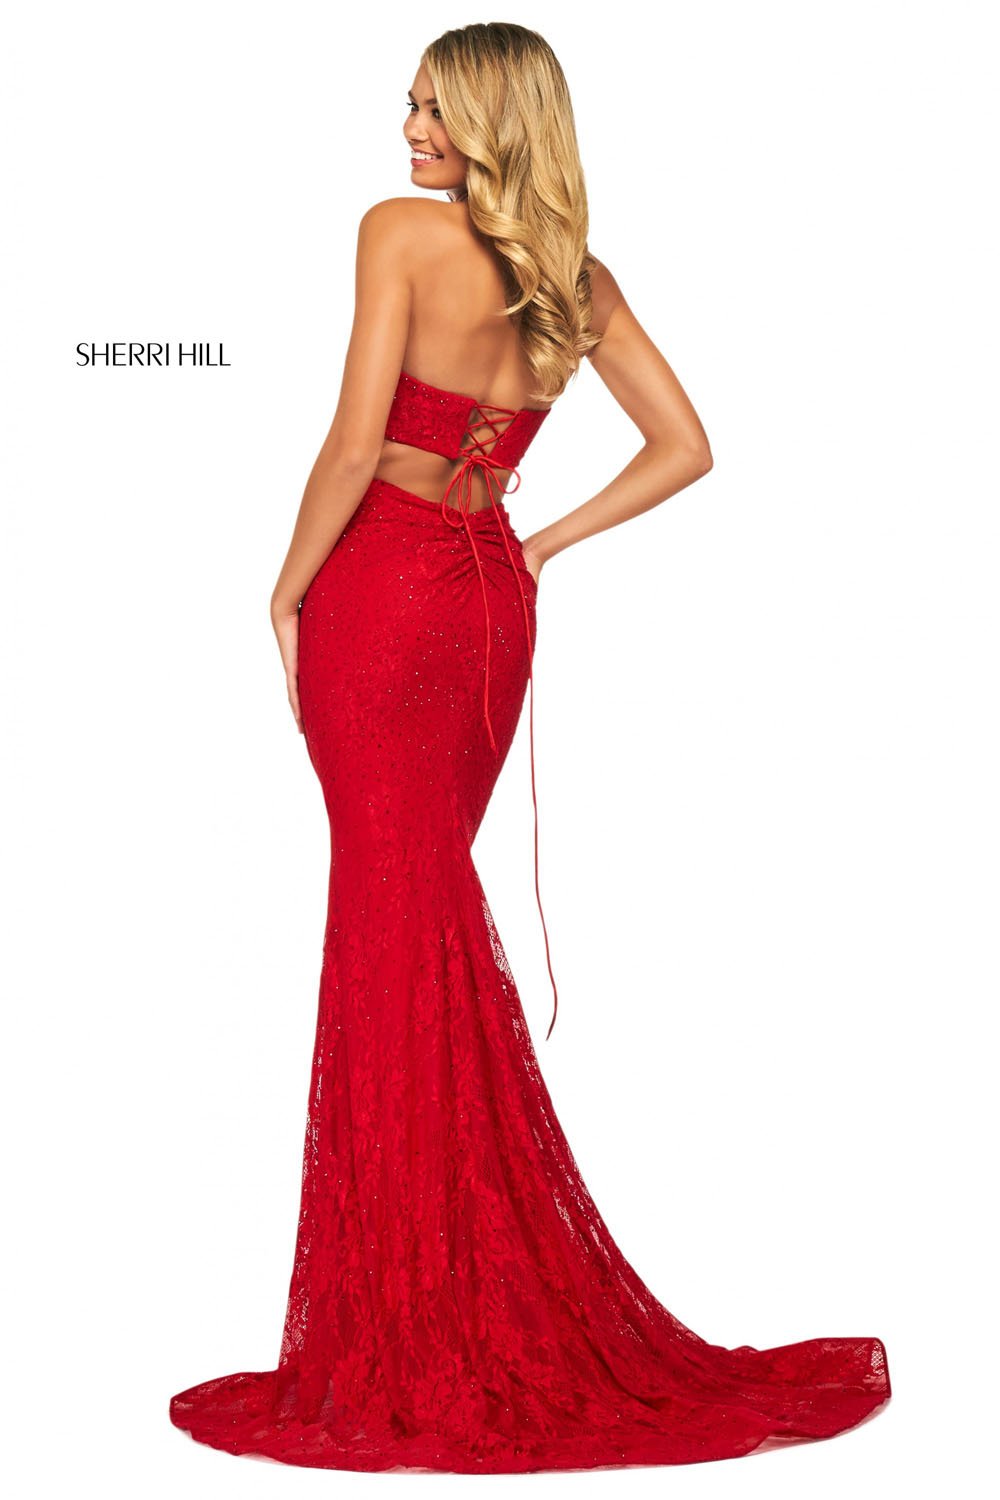 Sherri Hill 53681 dress images in these colors: Red, Navy, Black, Ivory, Pink, Aqua.